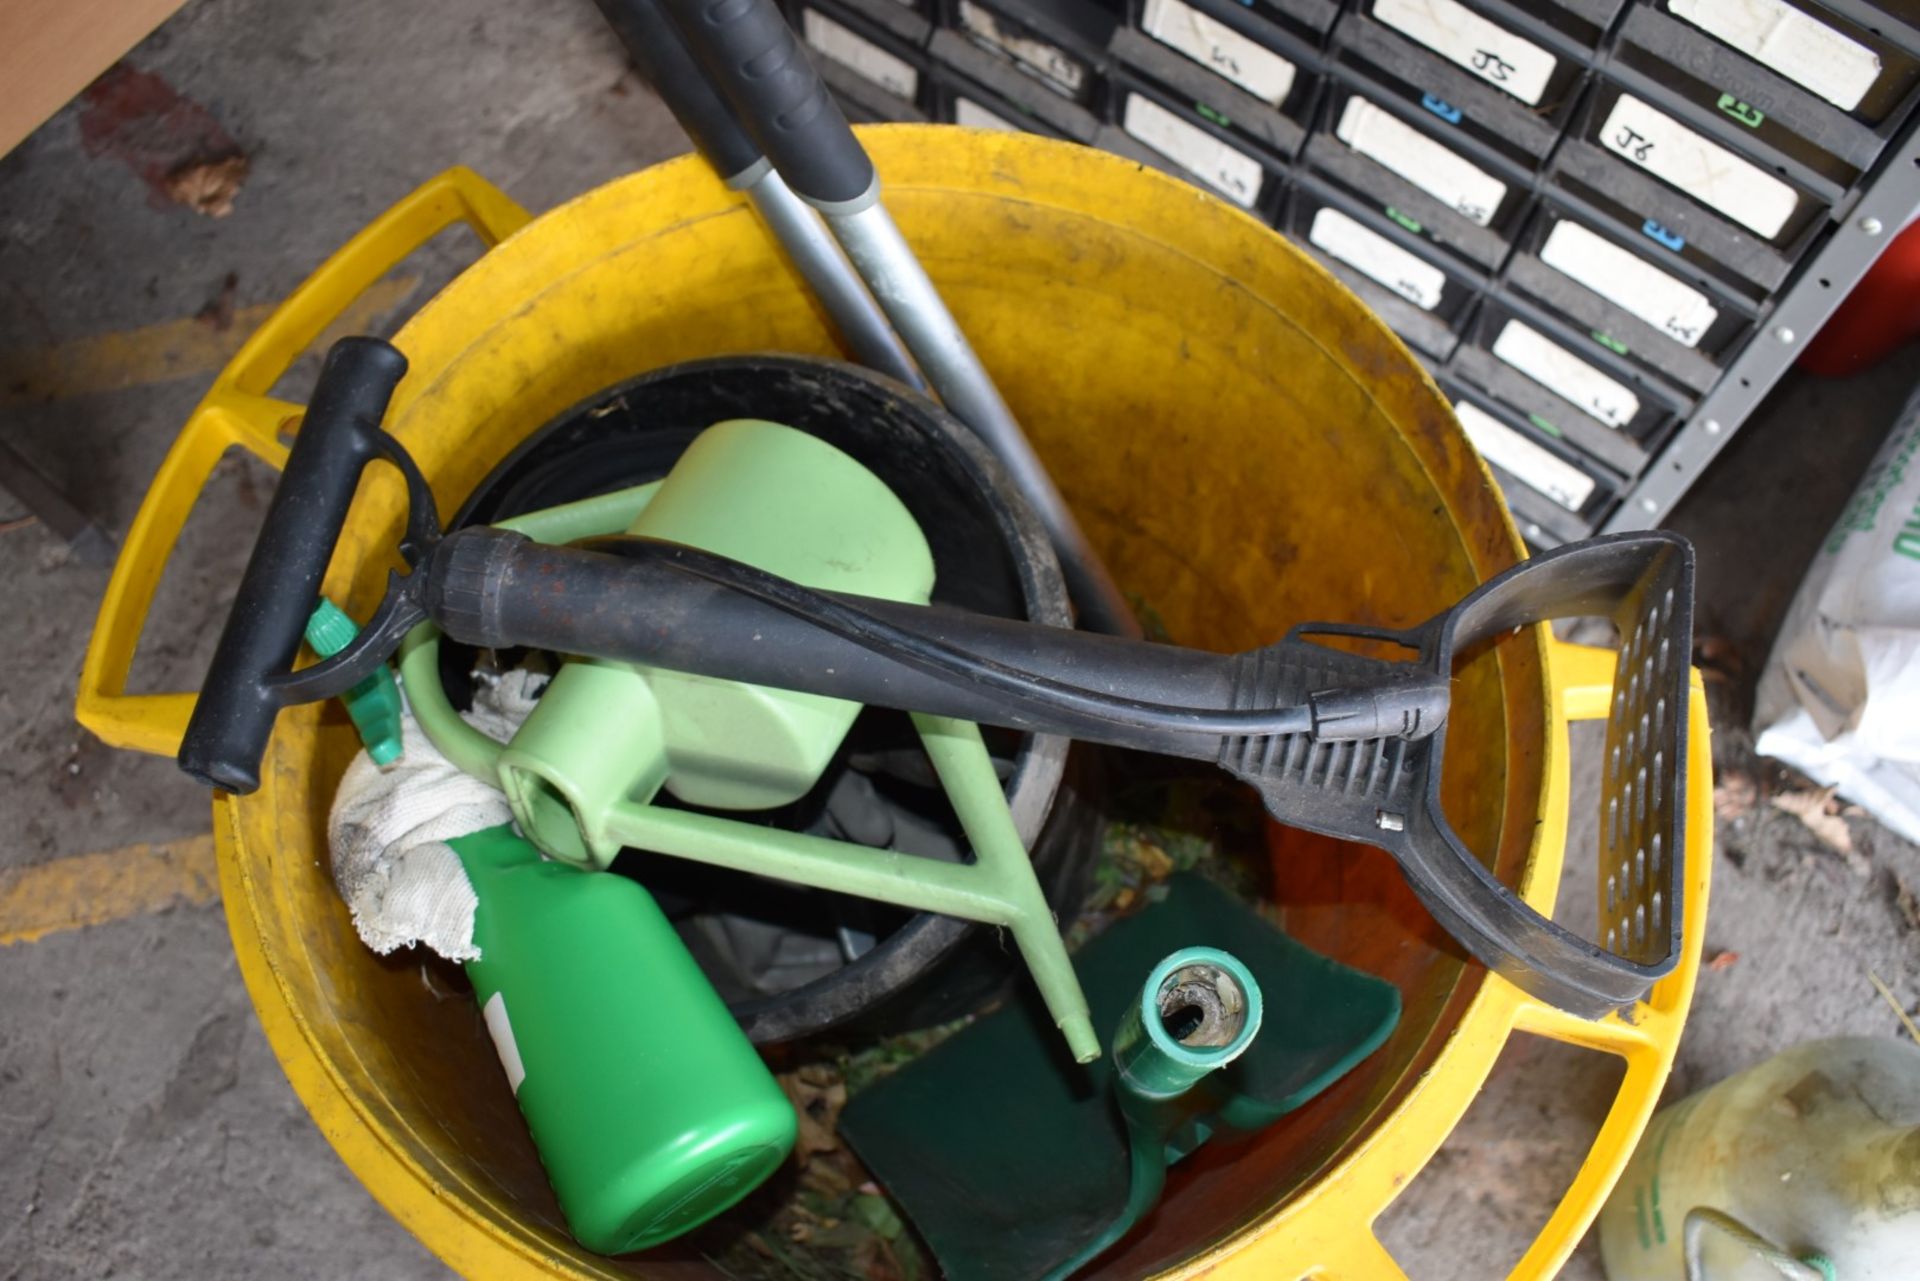 1 x Yellow Waste Bin With Selection of Gardening Tools and Air Pump - Ref VM105 B2 - CL409 - - Image 4 of 5